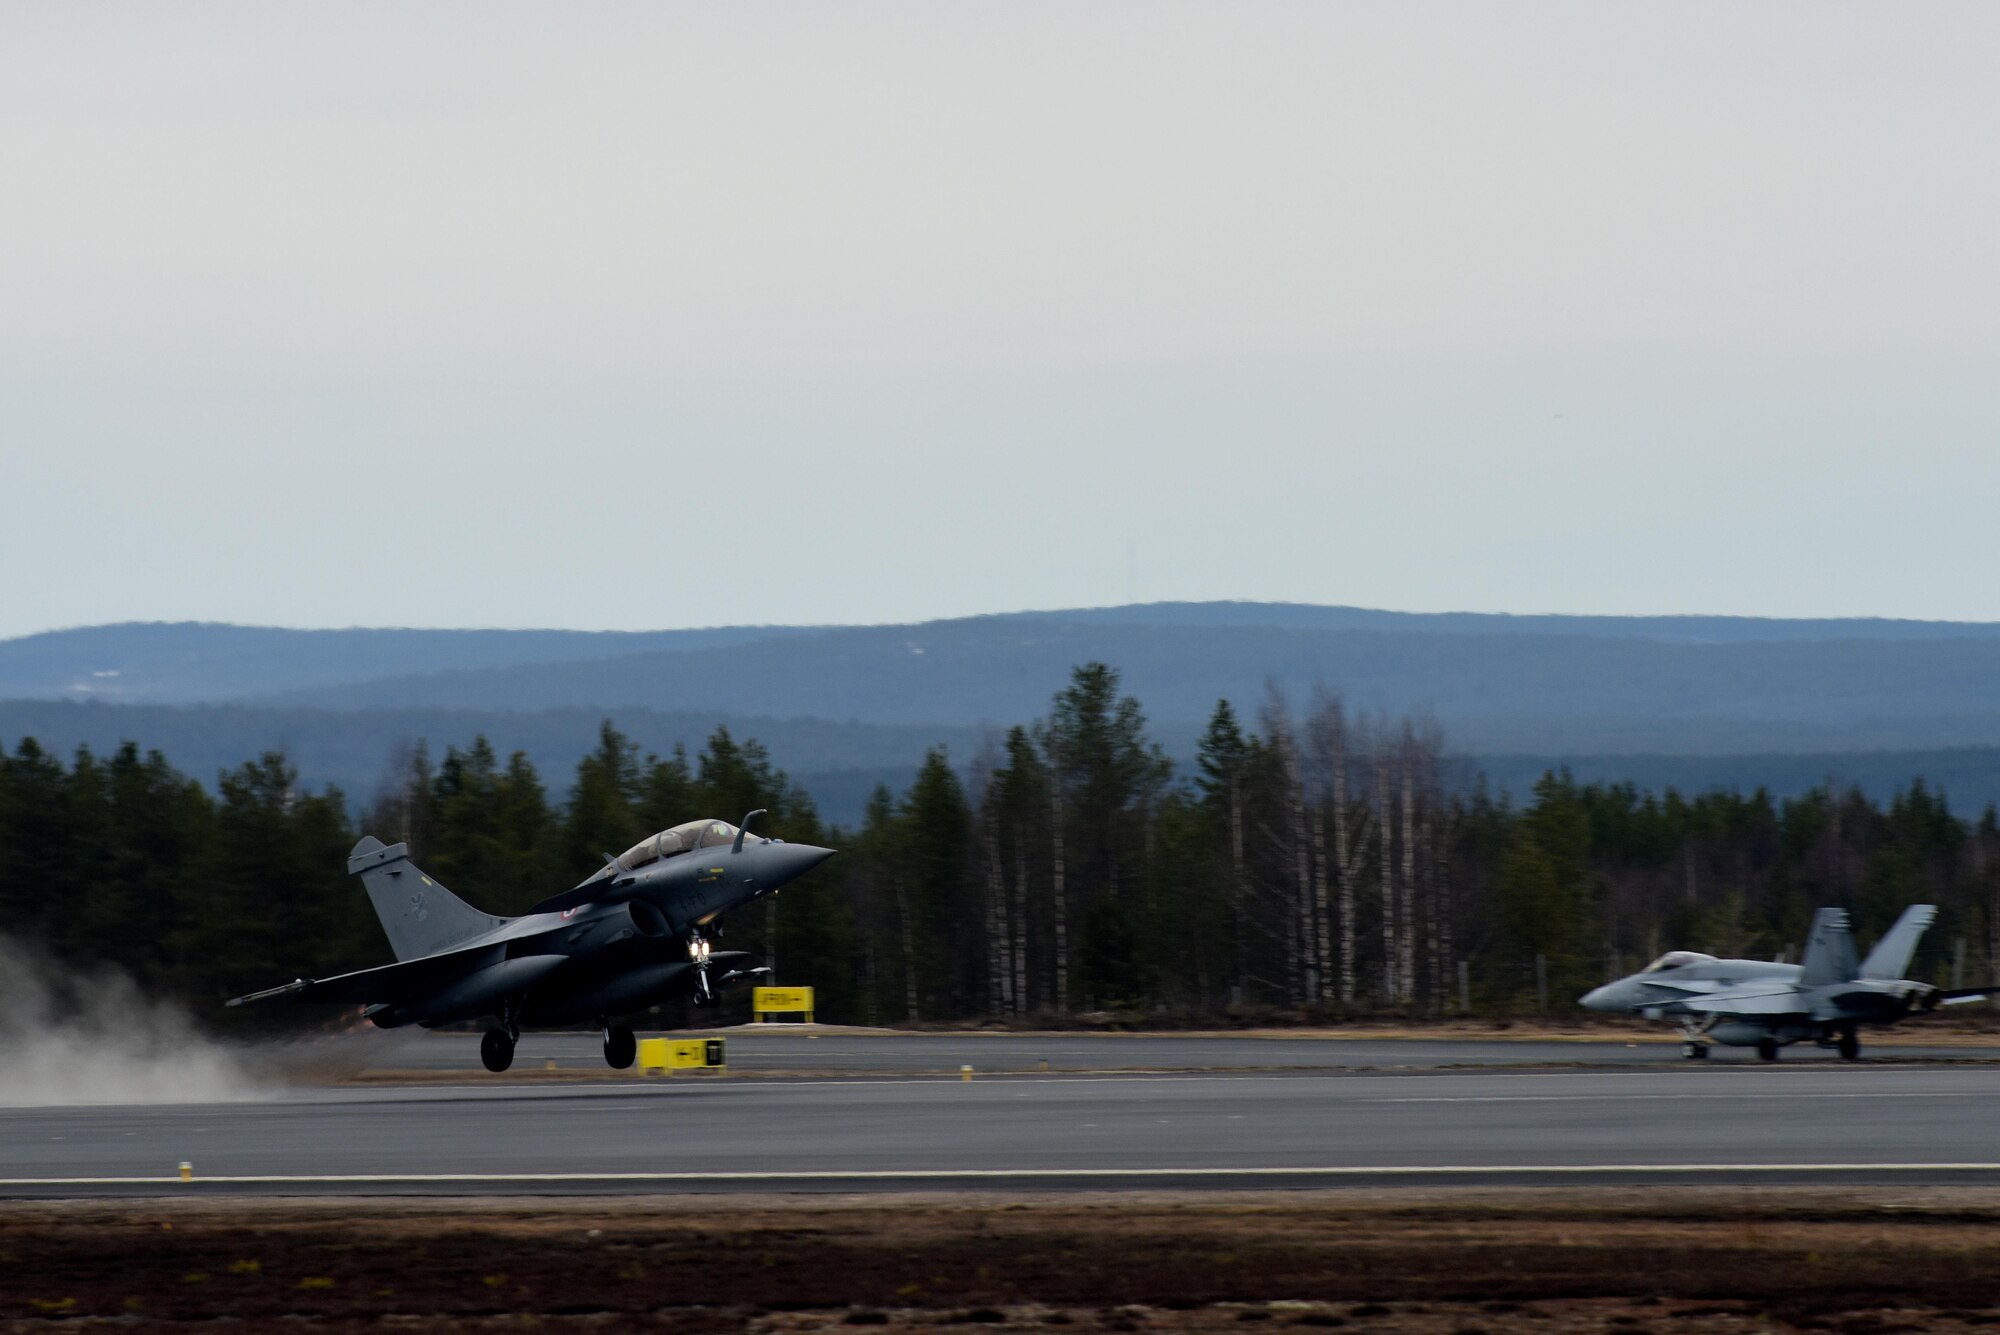 A French Rafale takes off at Rovaniemi Air Base, Finland, May 22, in support of Arctic Challenge 2017. Through exercises like ACE 17, the U.S., allies and partner nations are able to train together in a realistic environment, working to ensure security, protect global interests and strengthen economic bonds in Europe. (U.S. Air Force photo/Airman 1st Class Abby L. Finkel)